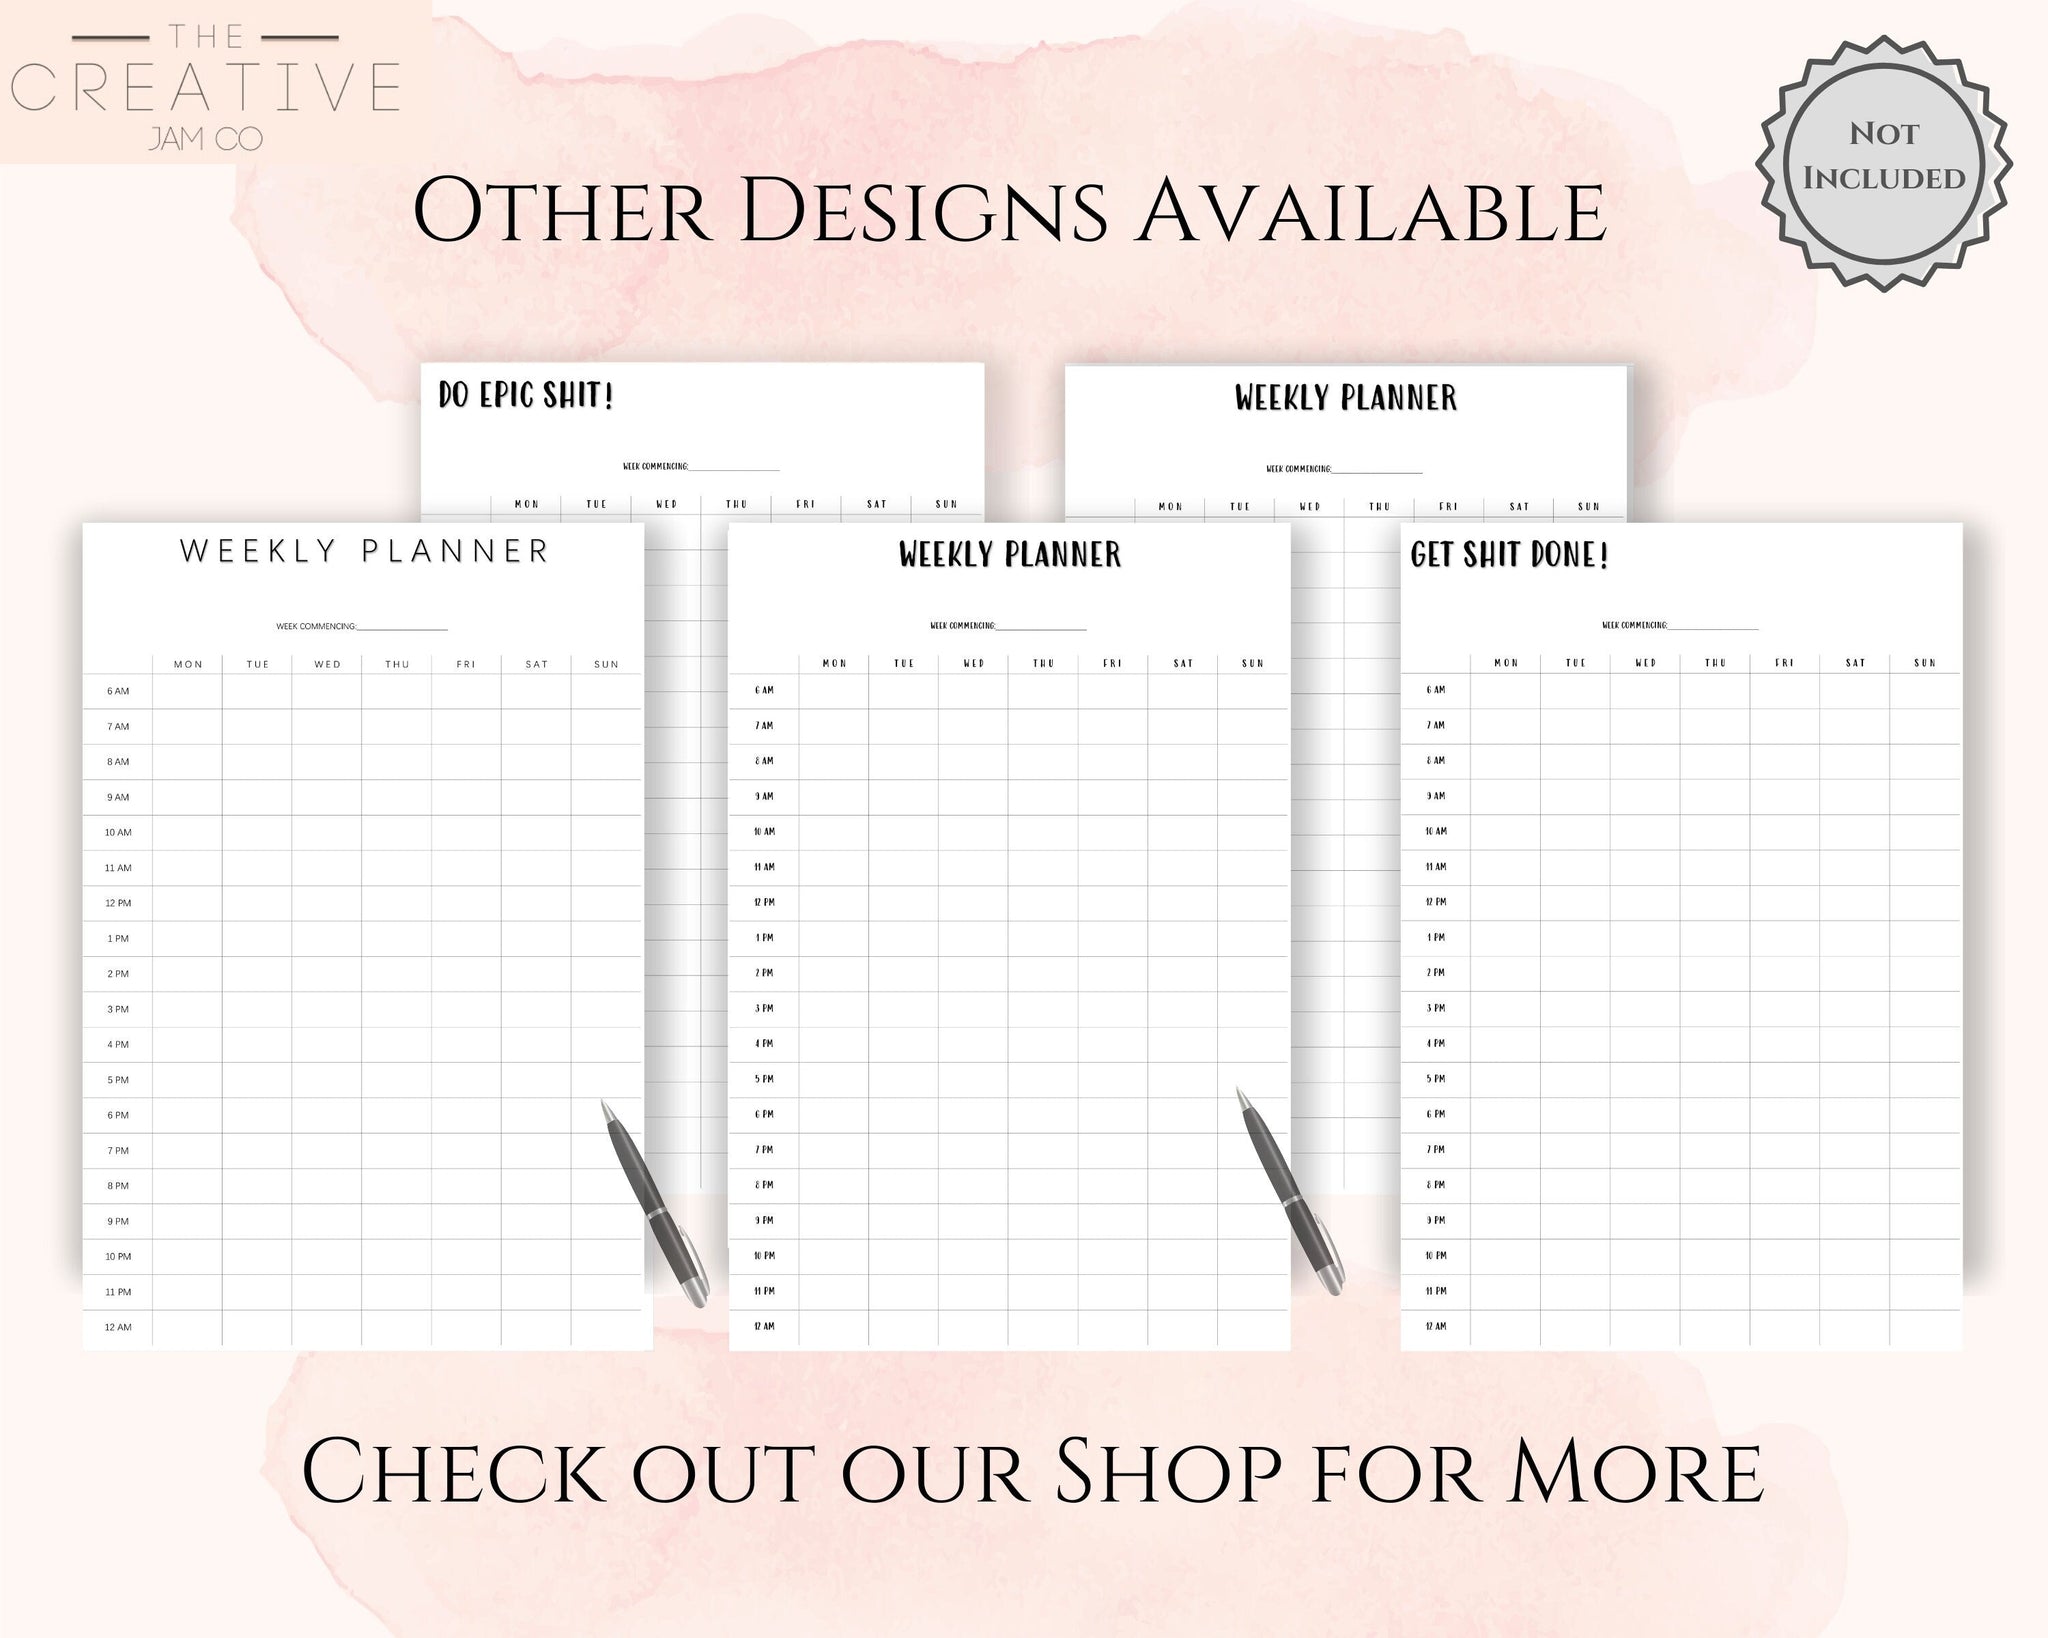 To Do List, To Do List Notebook, Printable Planner, Planner Refill